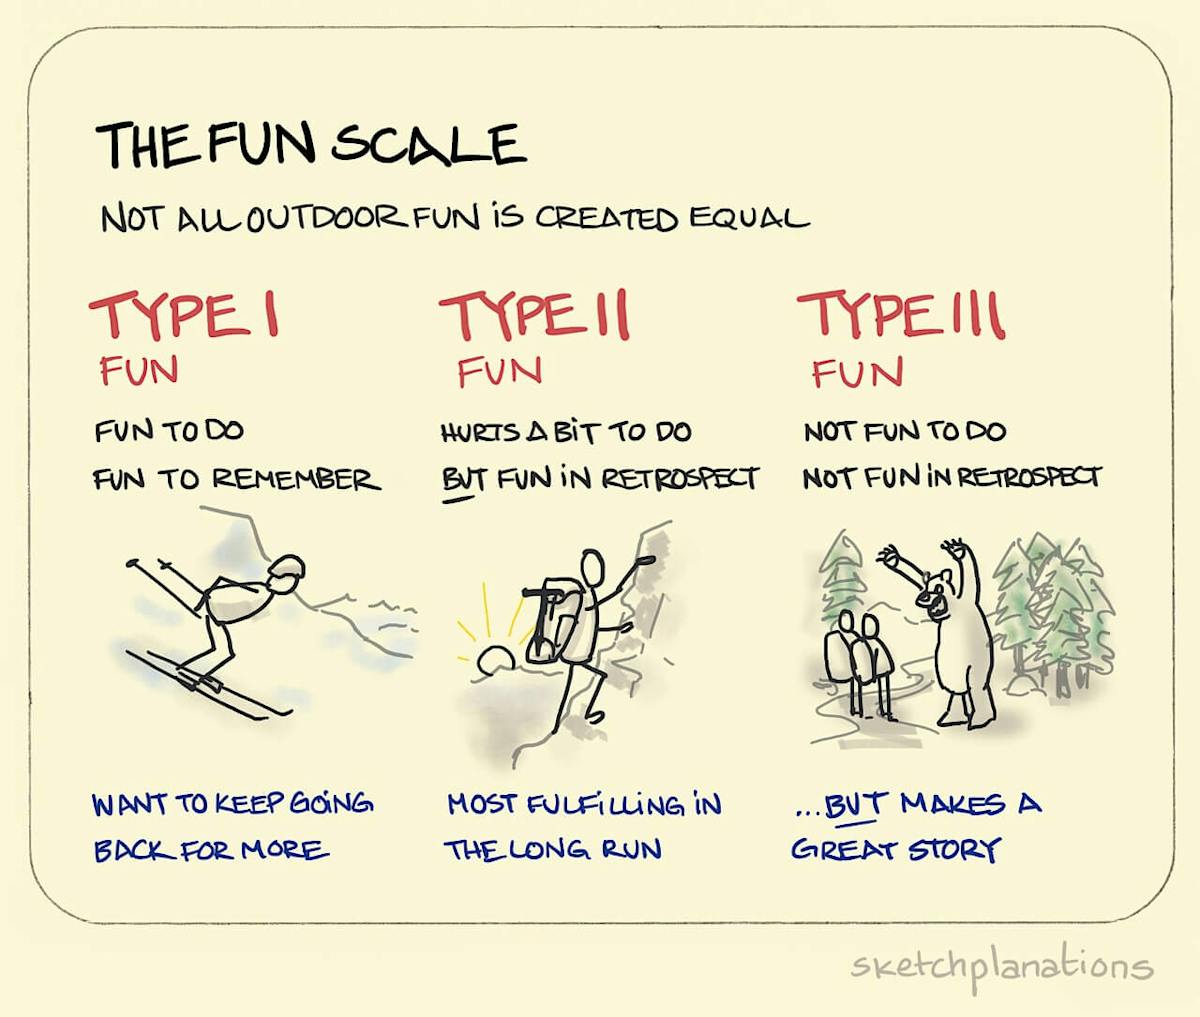 The fun scale - Sketchplanations